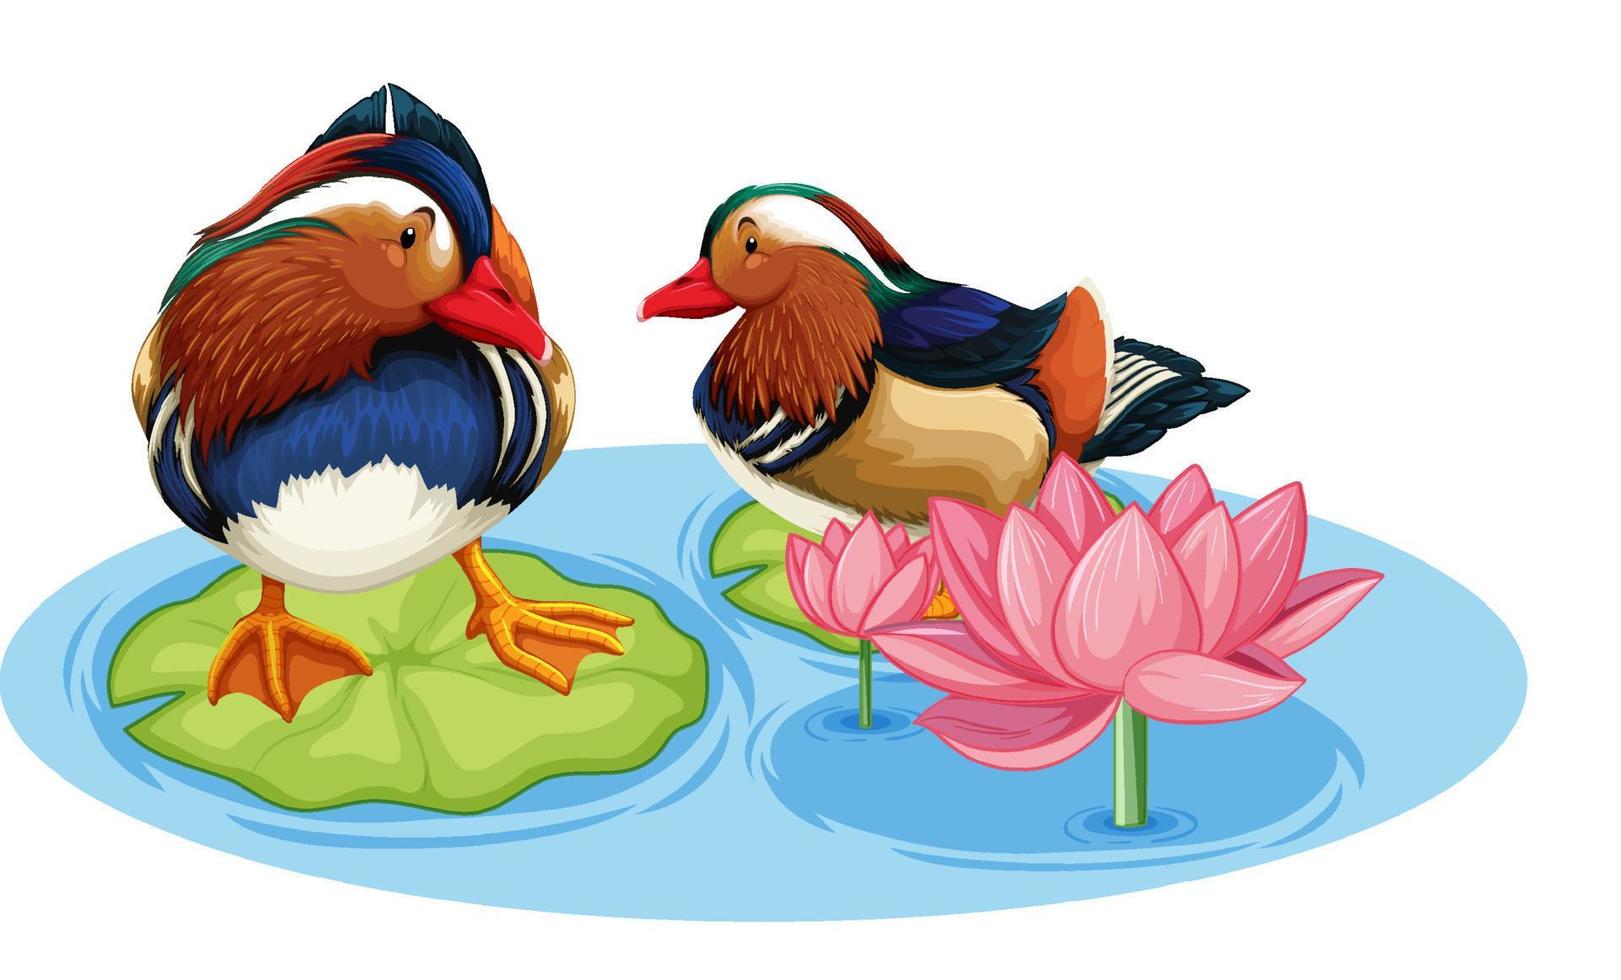 Two ducks in pond with lotus flower vector